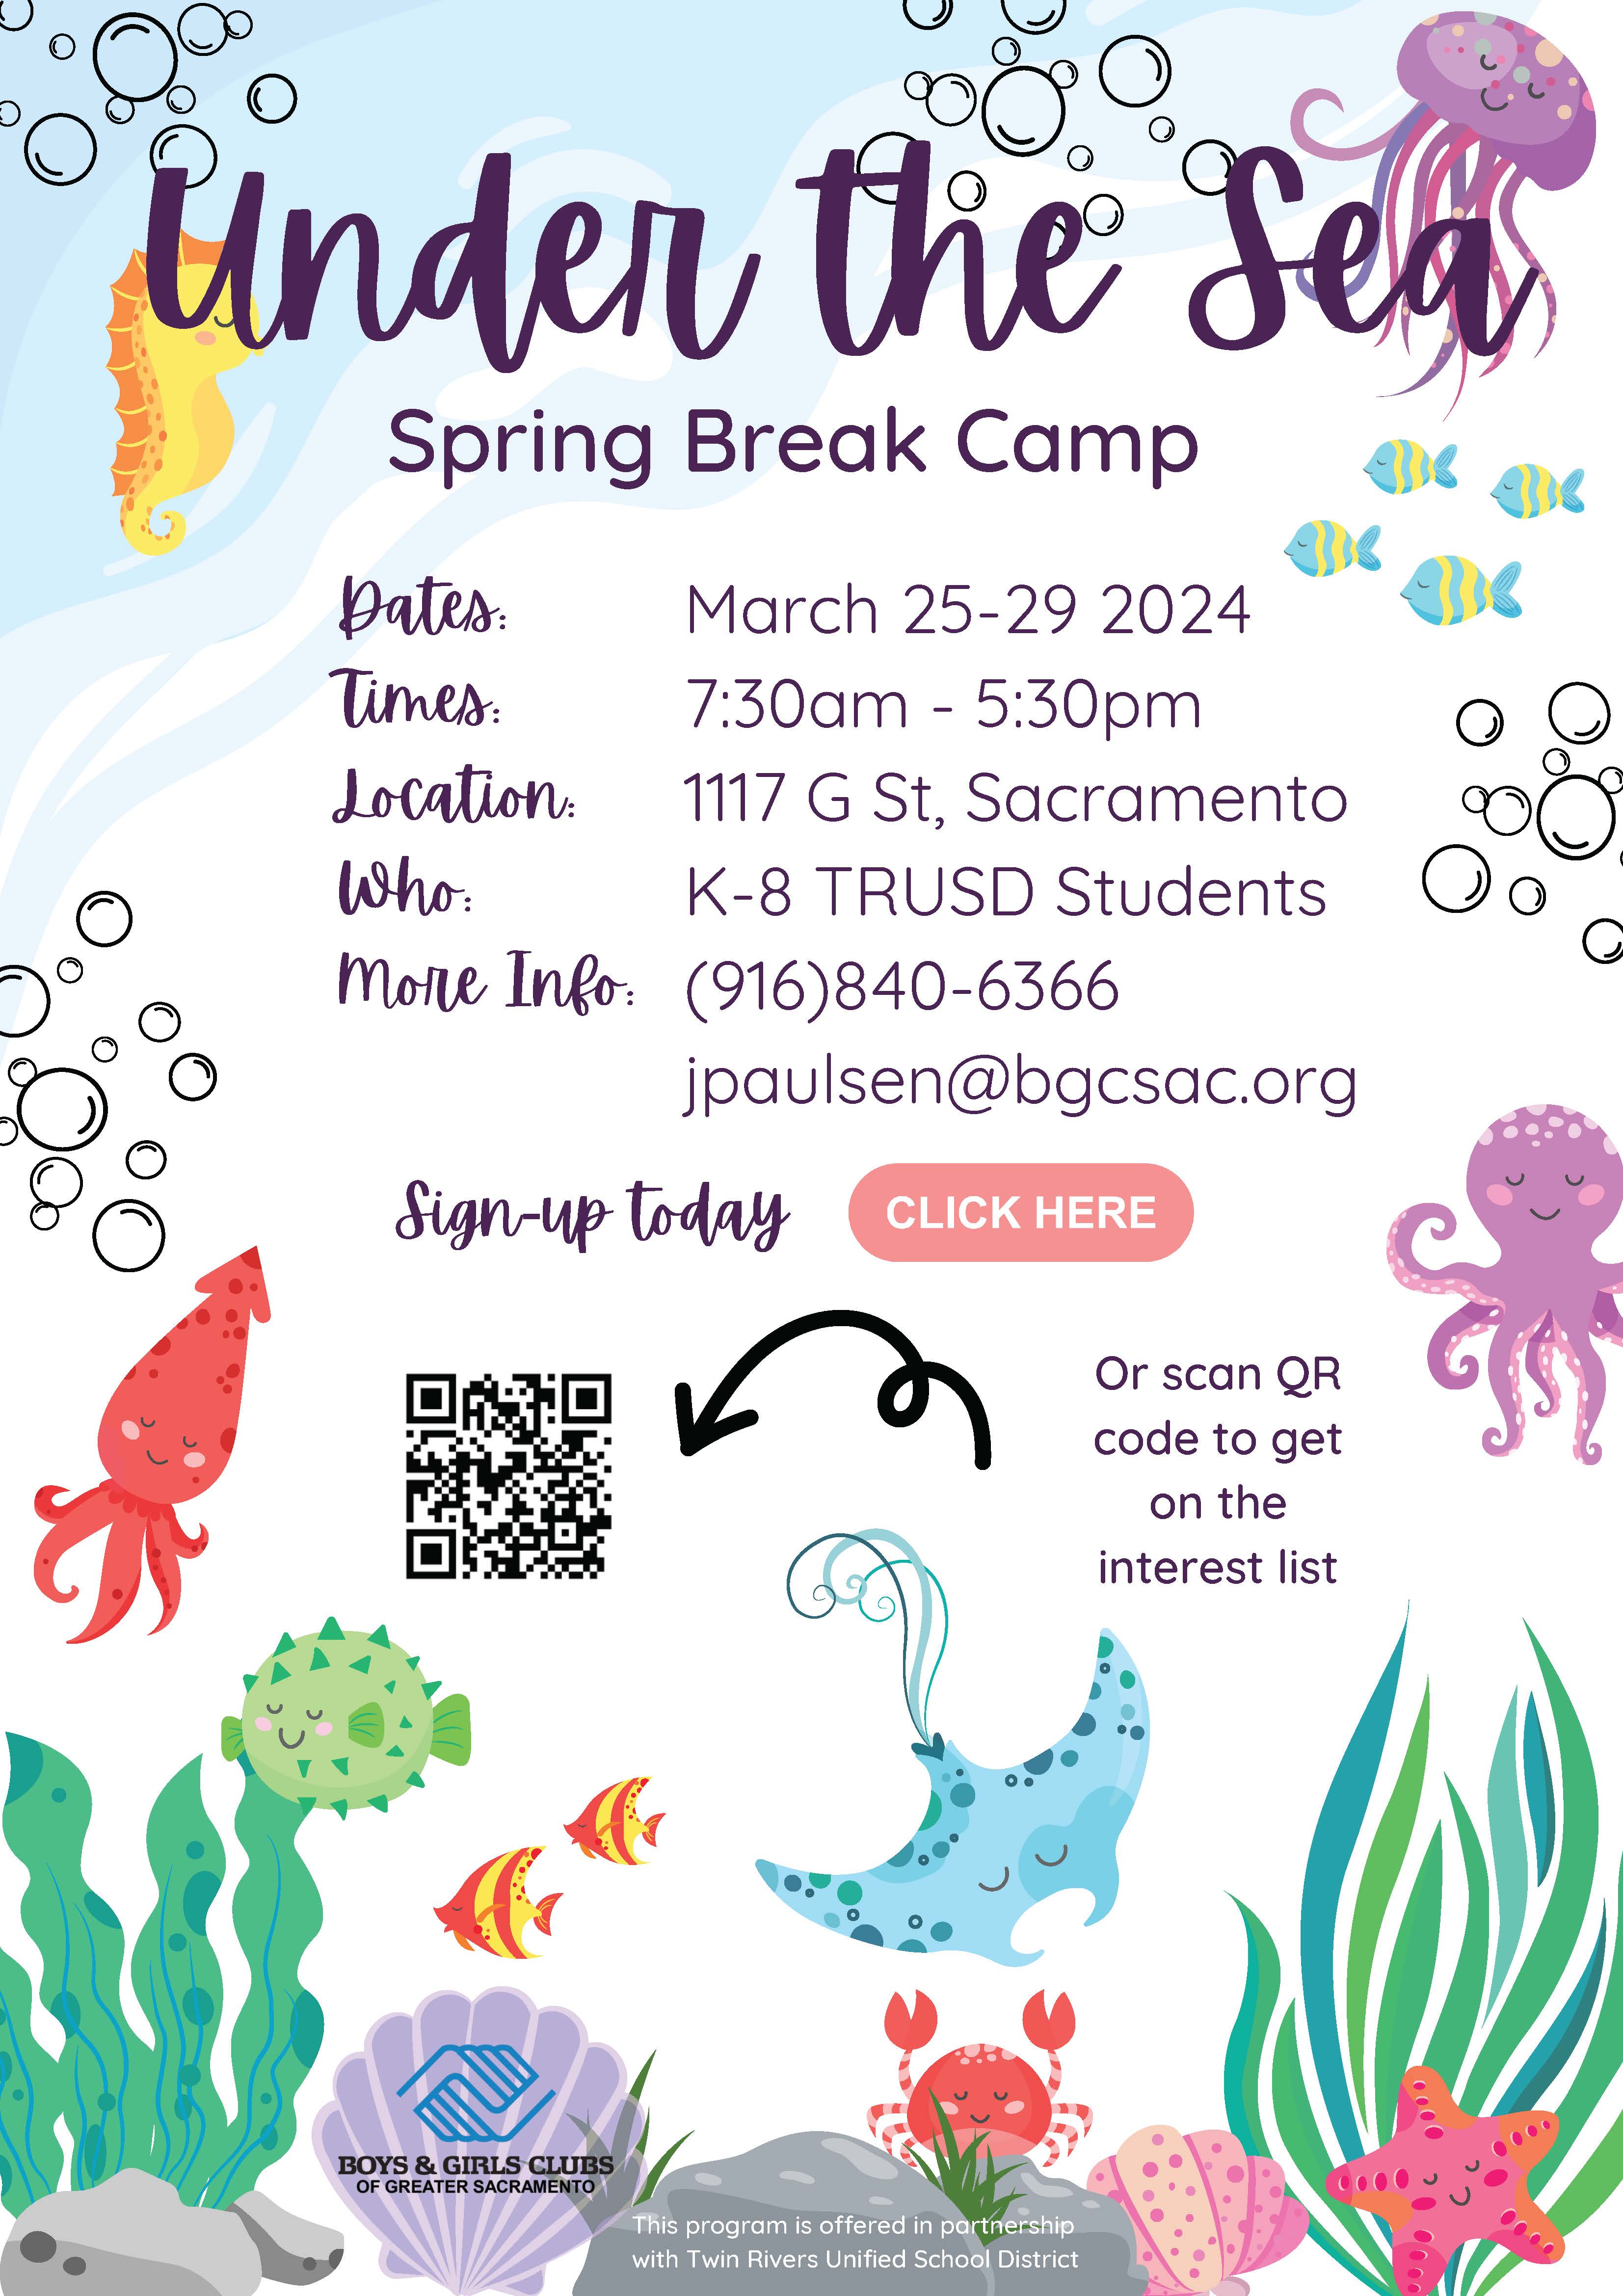 Boys & Girls Club Spring Break Camp Flyer. March 25-29 2024. 7:30 am to 5:30 pm. Register Below. Call 916-840-6366. for more information.